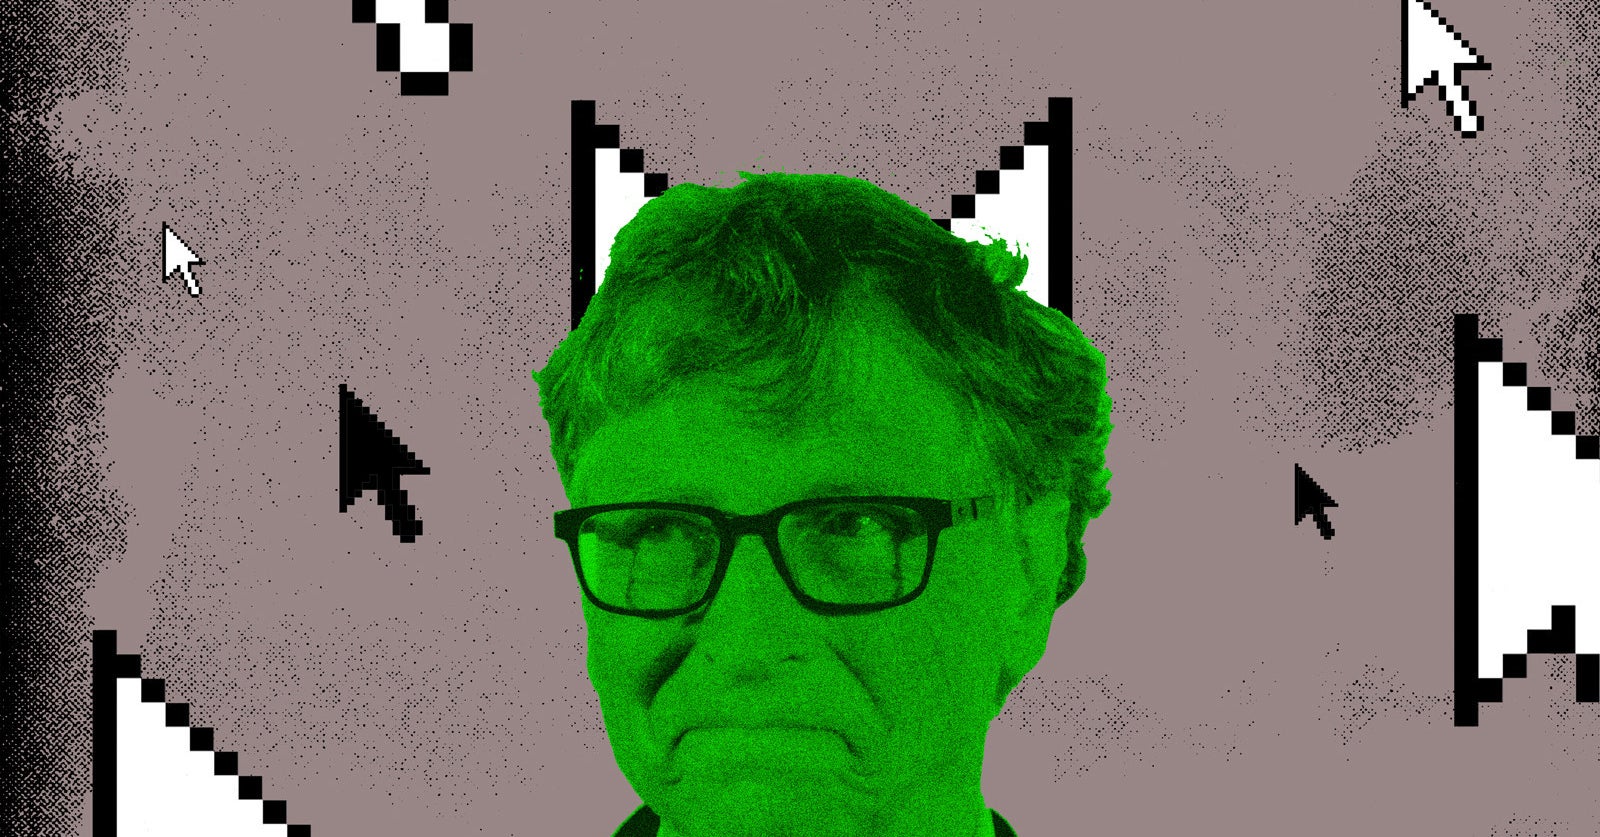 Facebook And YouTube Have Allowed Conspiracy Theorists To Turn Bill Gates Into The Pandemic's Villain